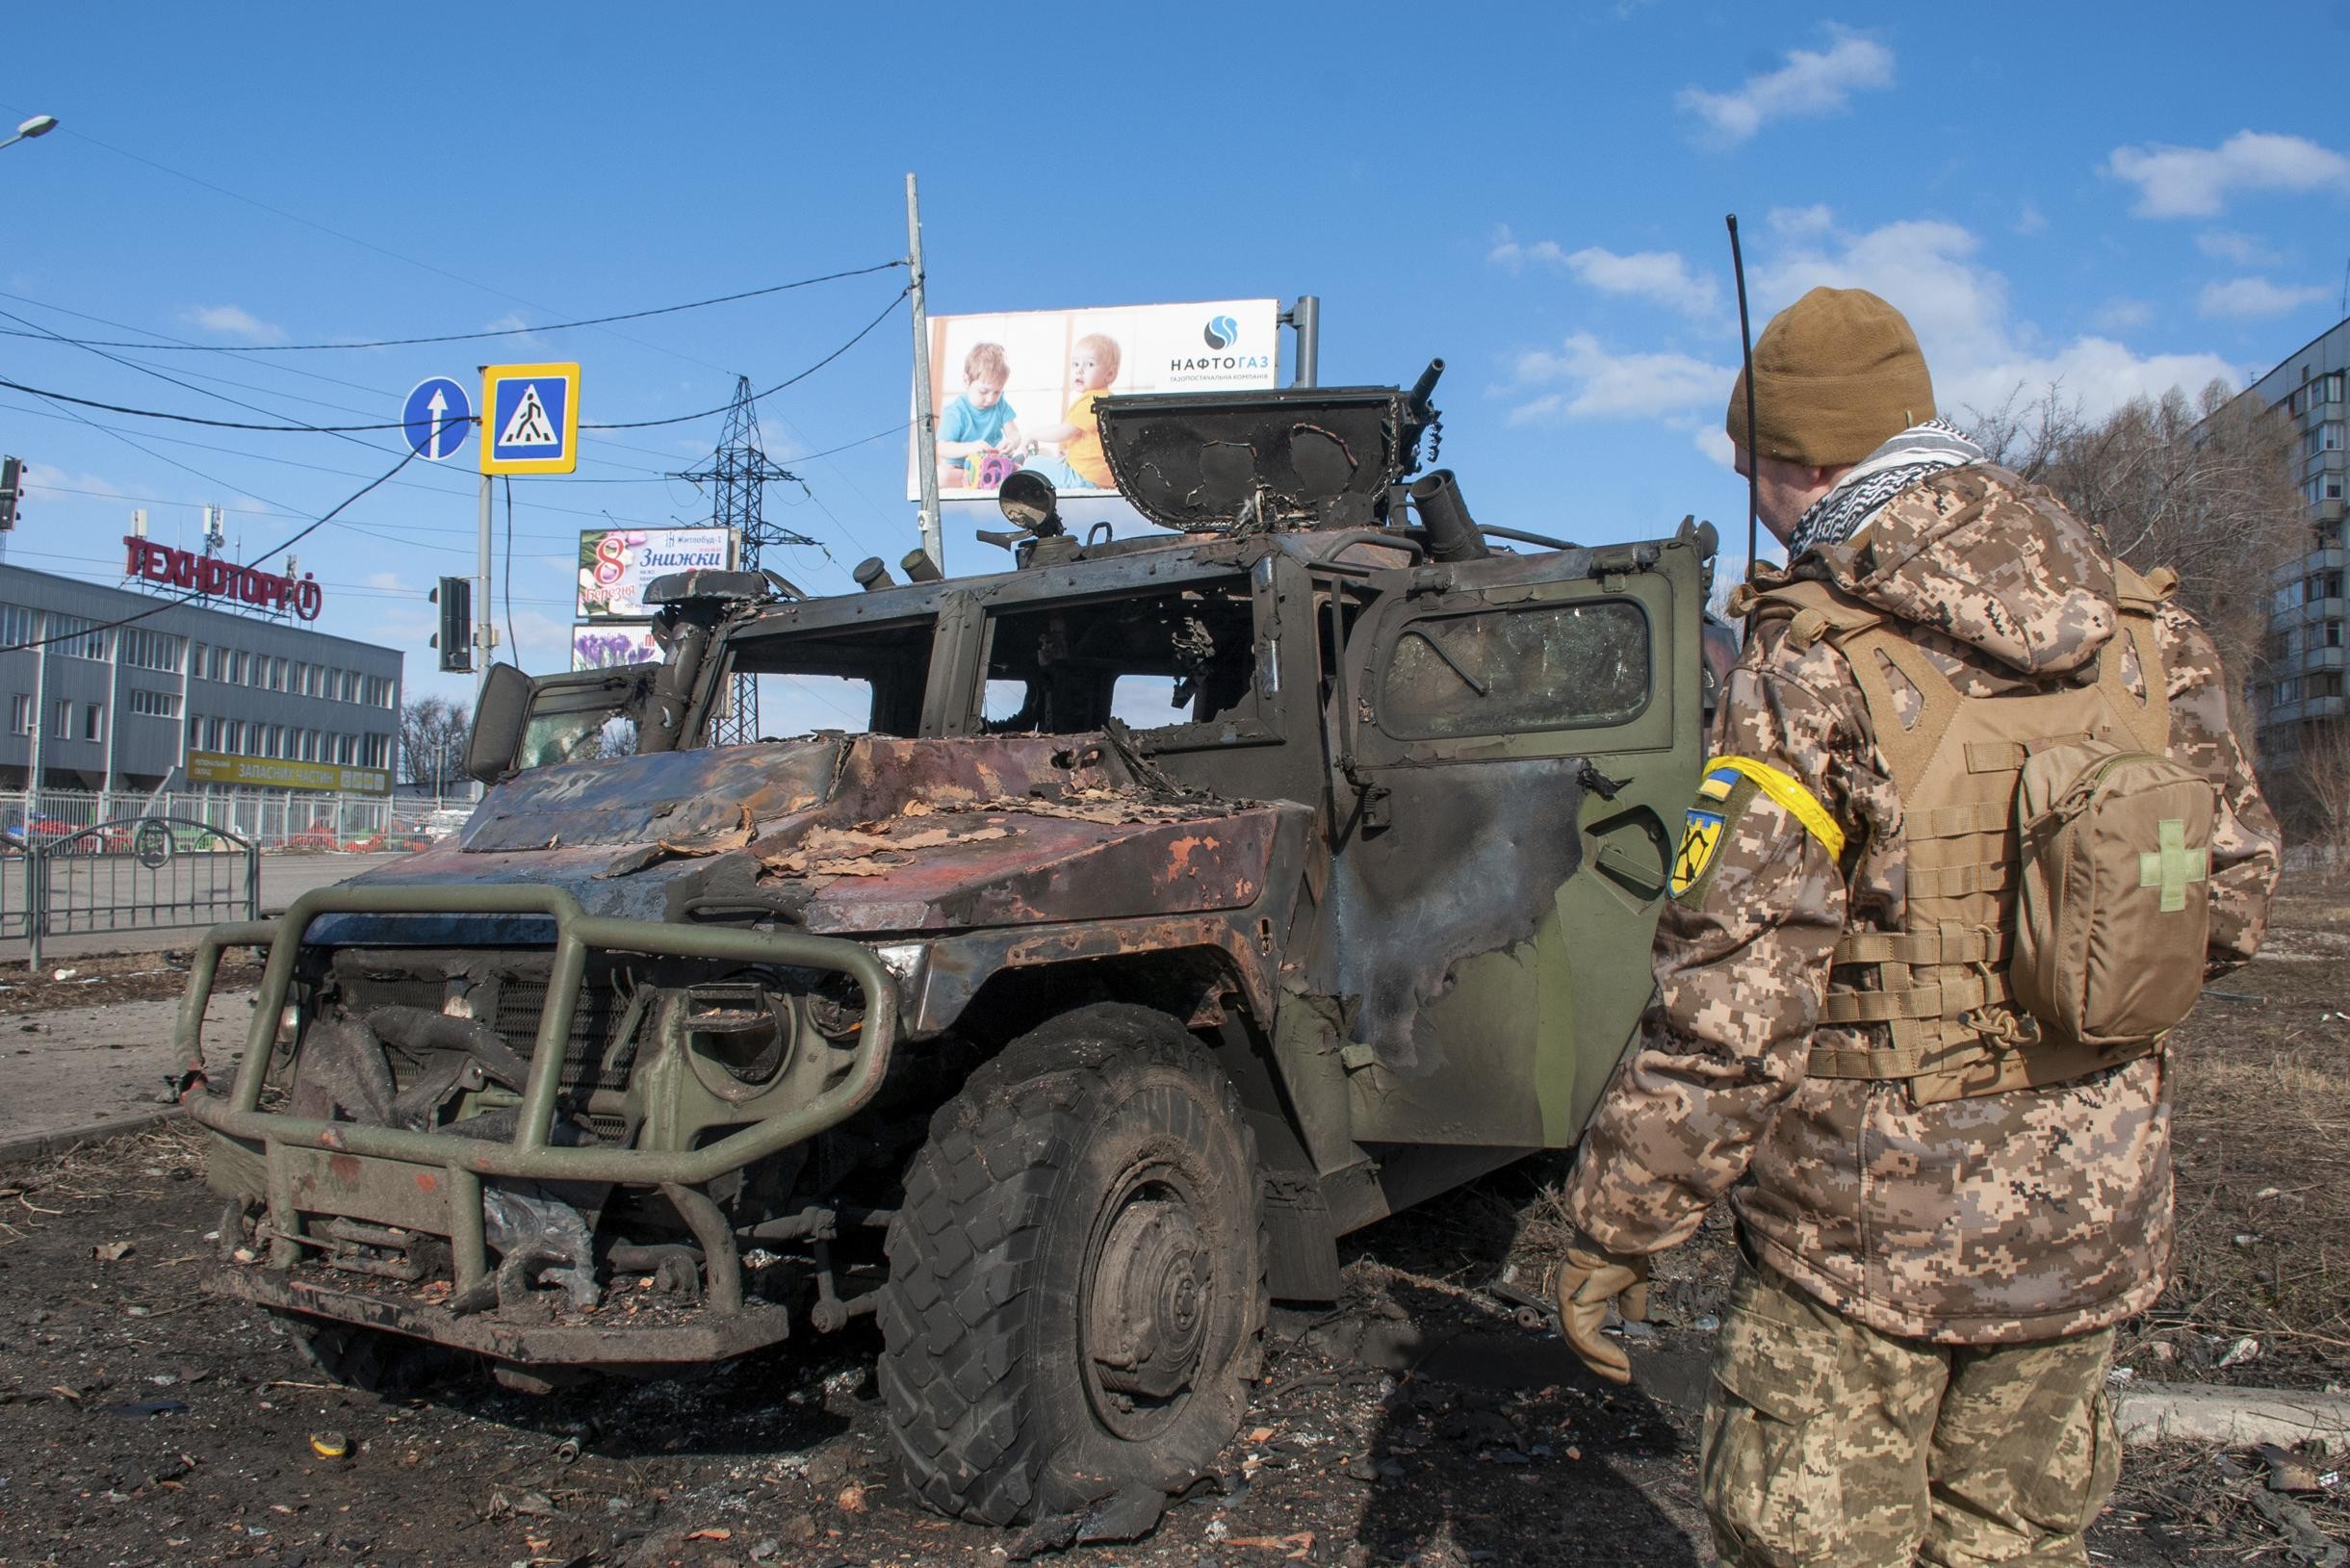 Ukraine offers amnesty and five million rubles to Russian soldiers who lay down weapons